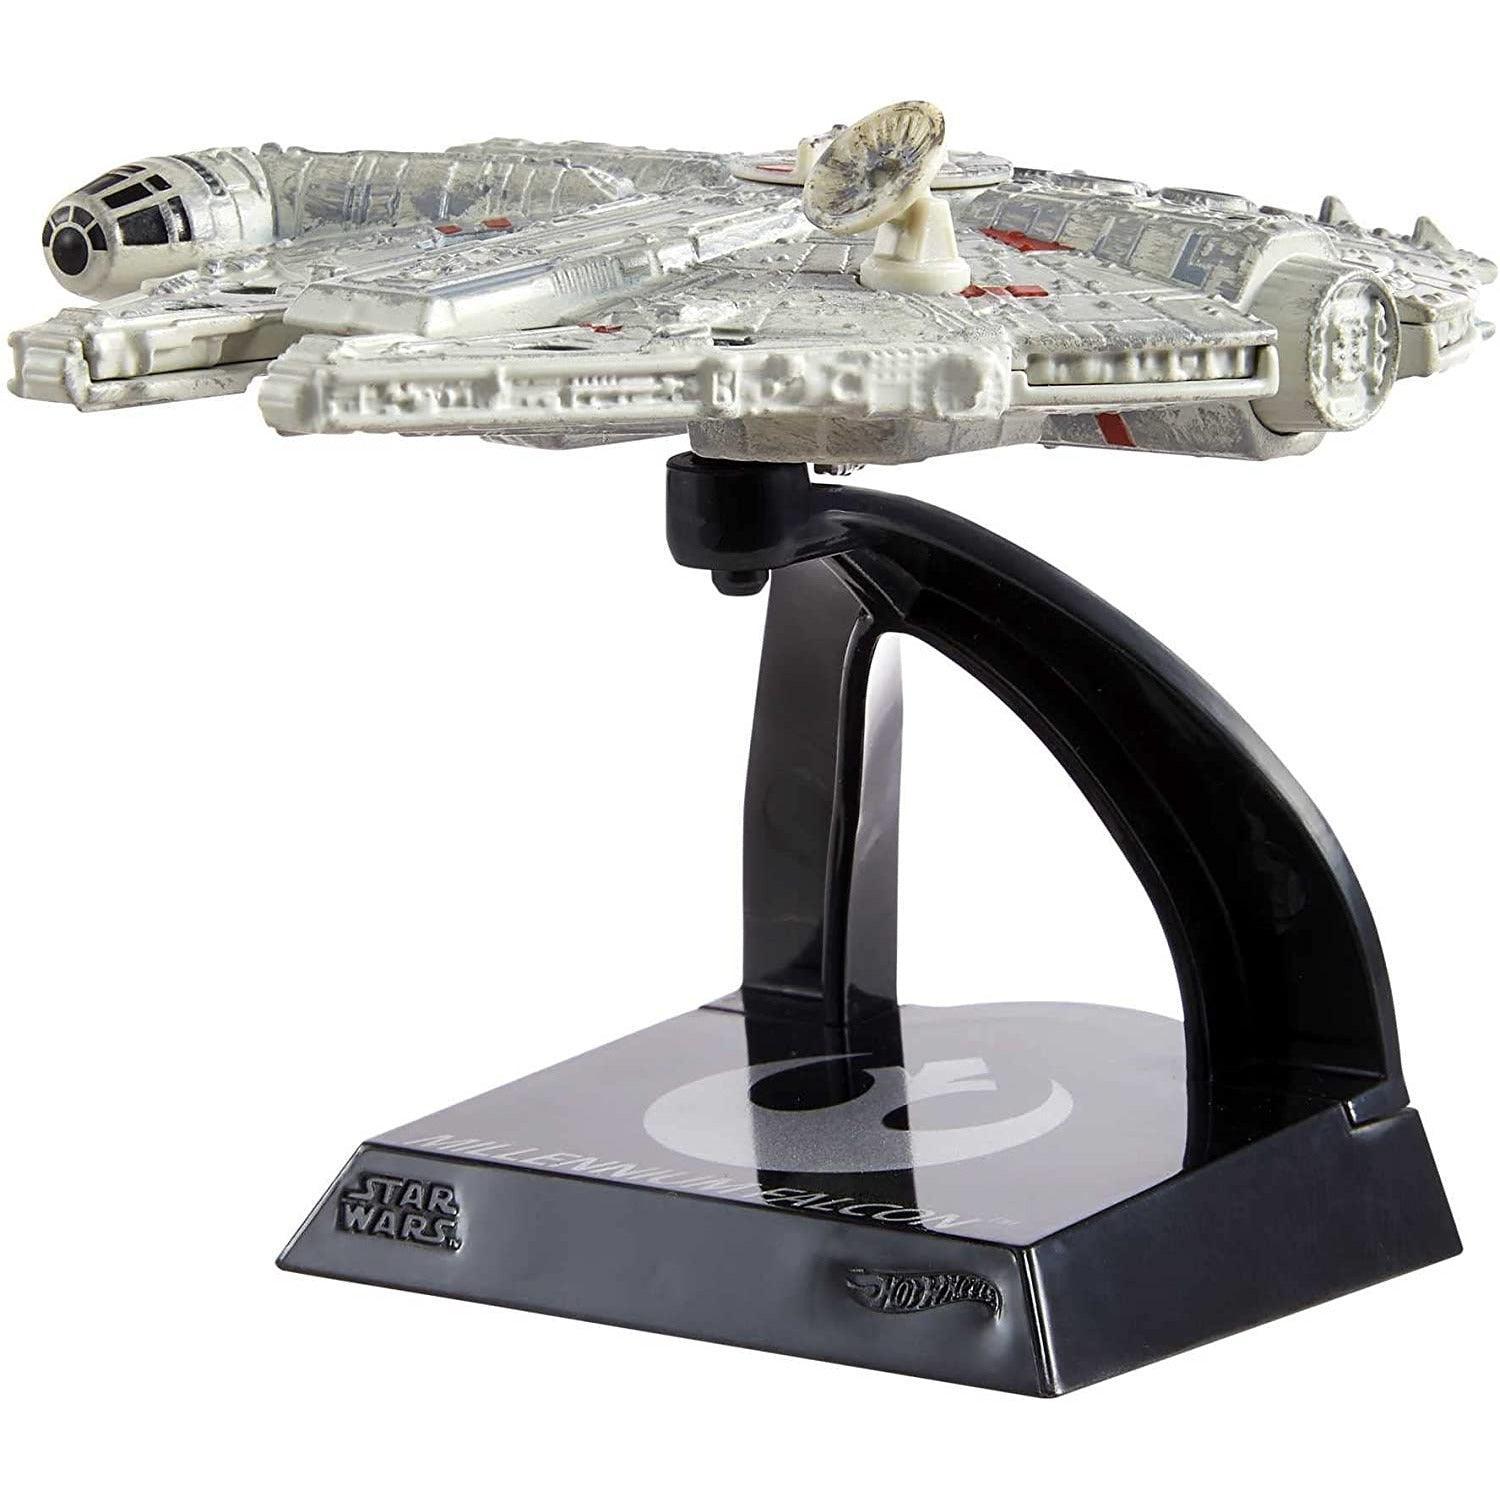 Hot Wheels Star Wars Starships Select, Premium Replica Starships Select Millennium Falcon Starship - BumbleToys - 18+, 5-7 Years, Action Figures, Boys, Pre-Order, star wars